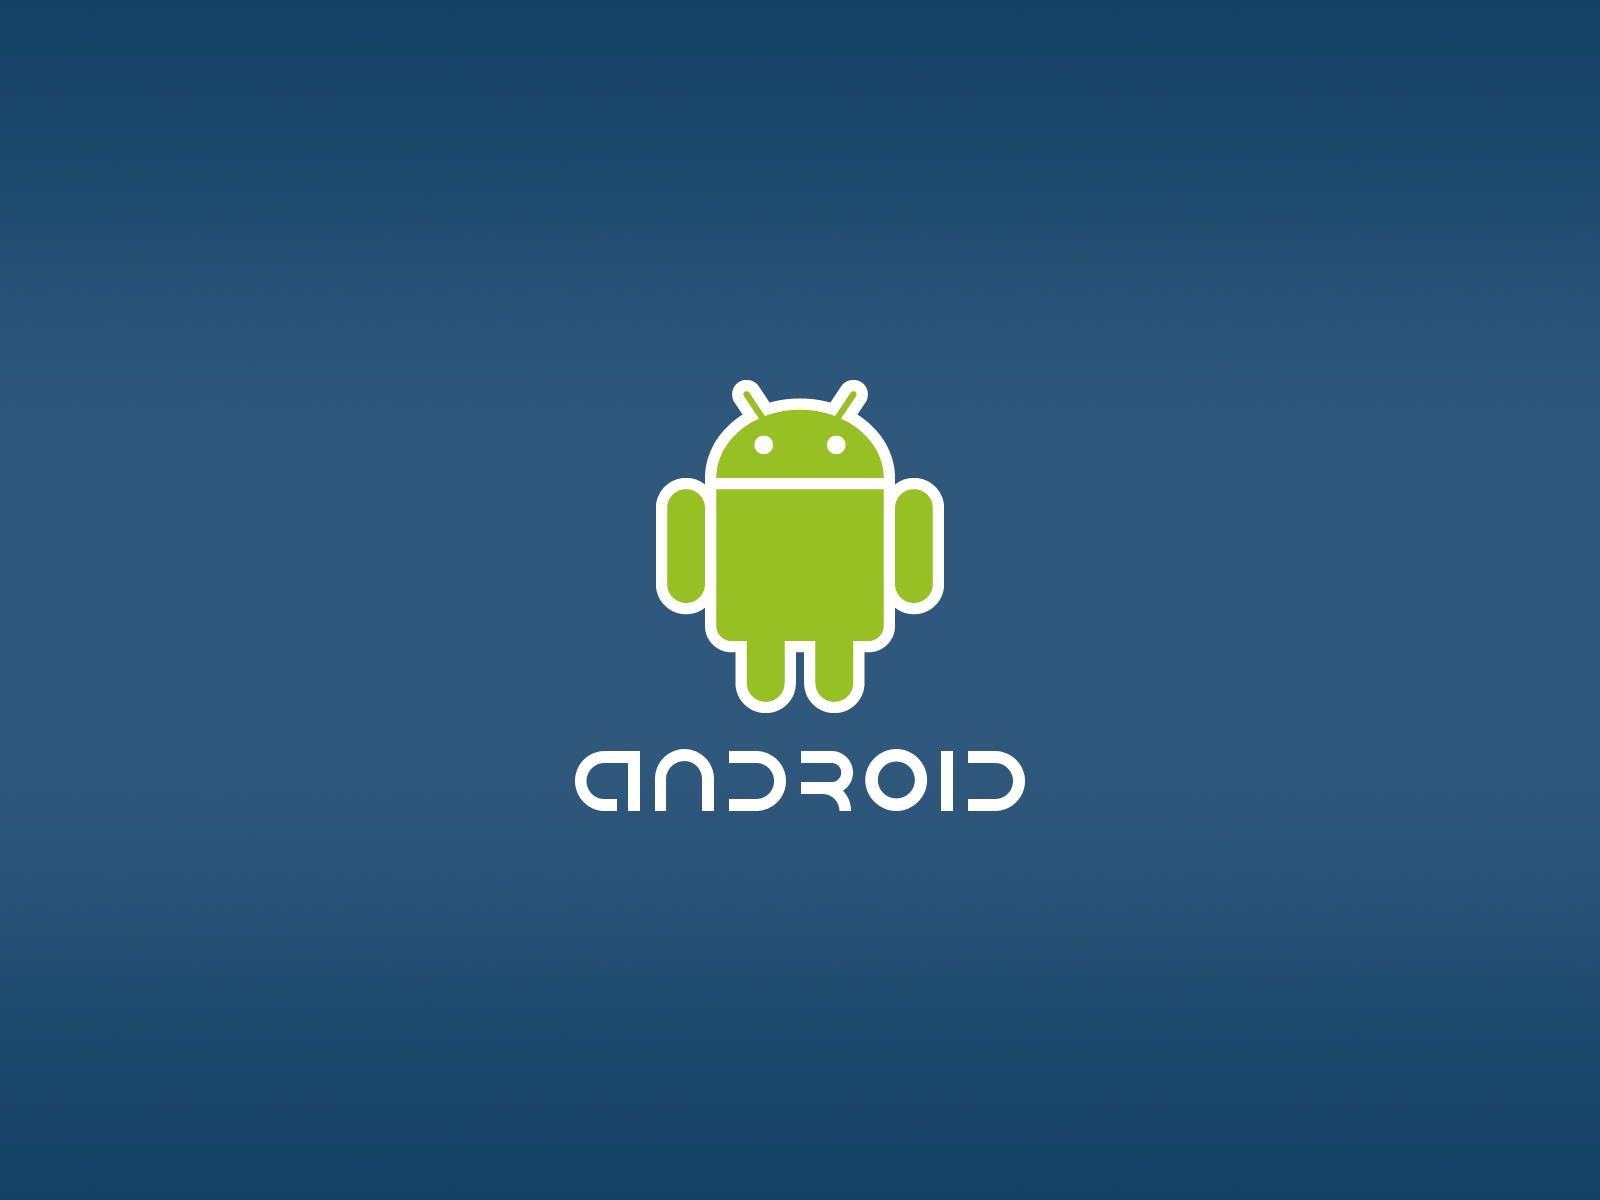 Free Download Android Wallpaper Android Desktop Wallpaperpng 1600x1200